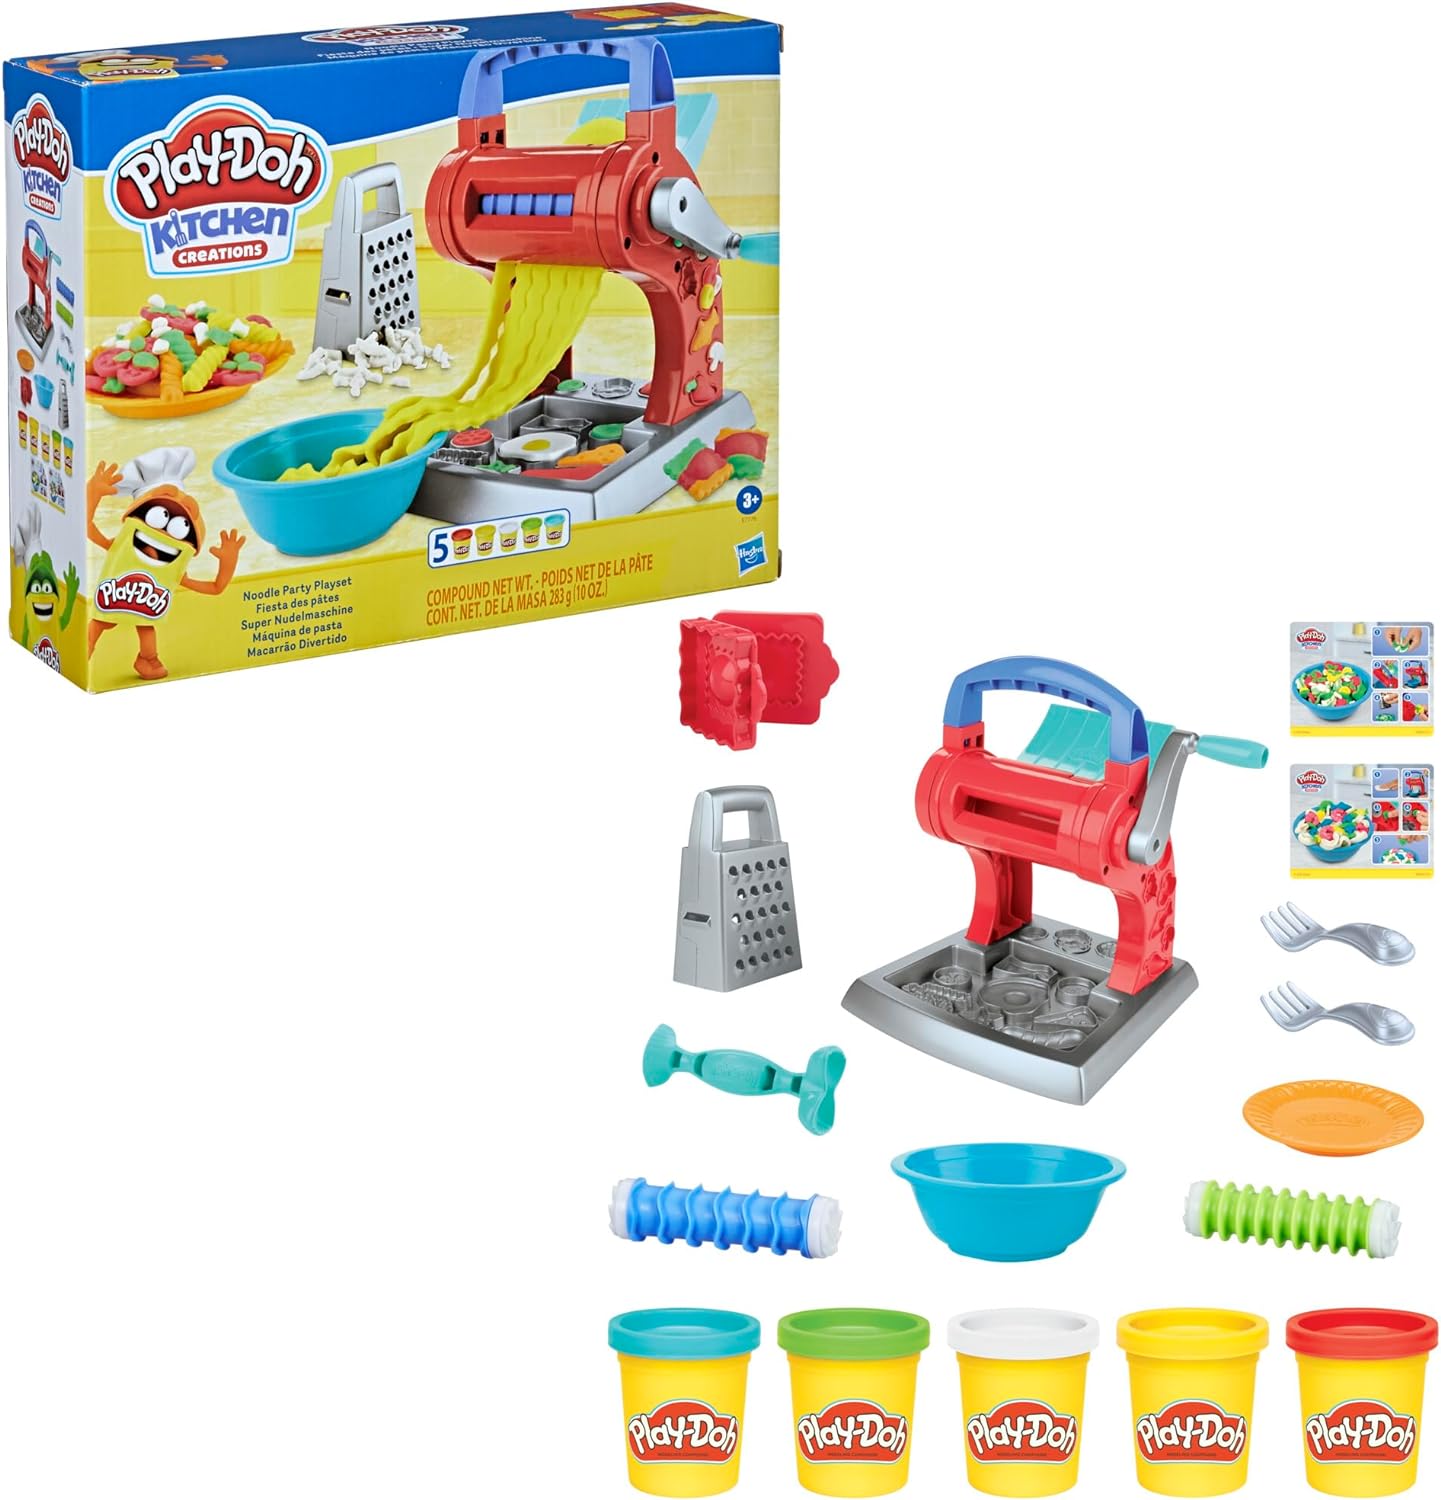 Play-doh Kitchen Noodle Playset